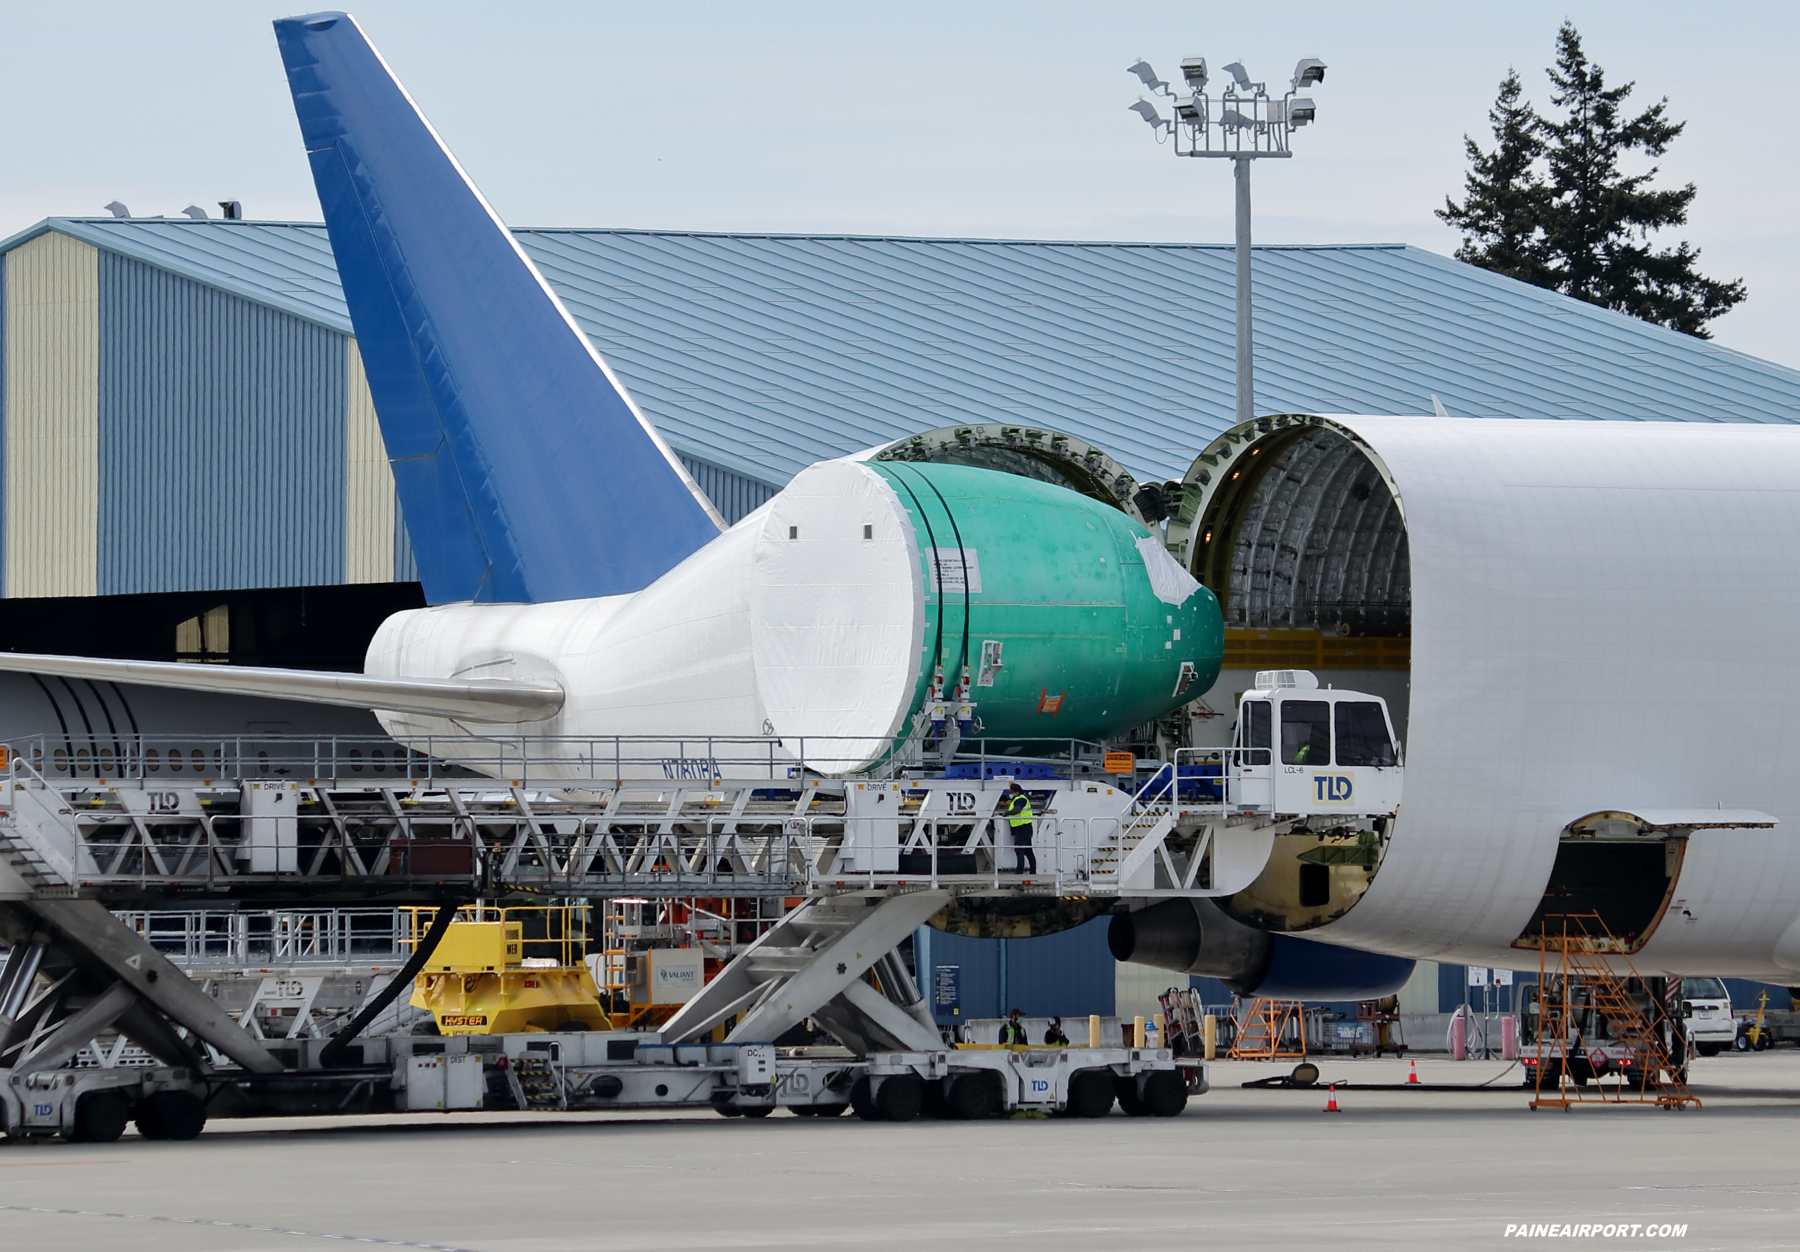 767 section 41 at Paine Field